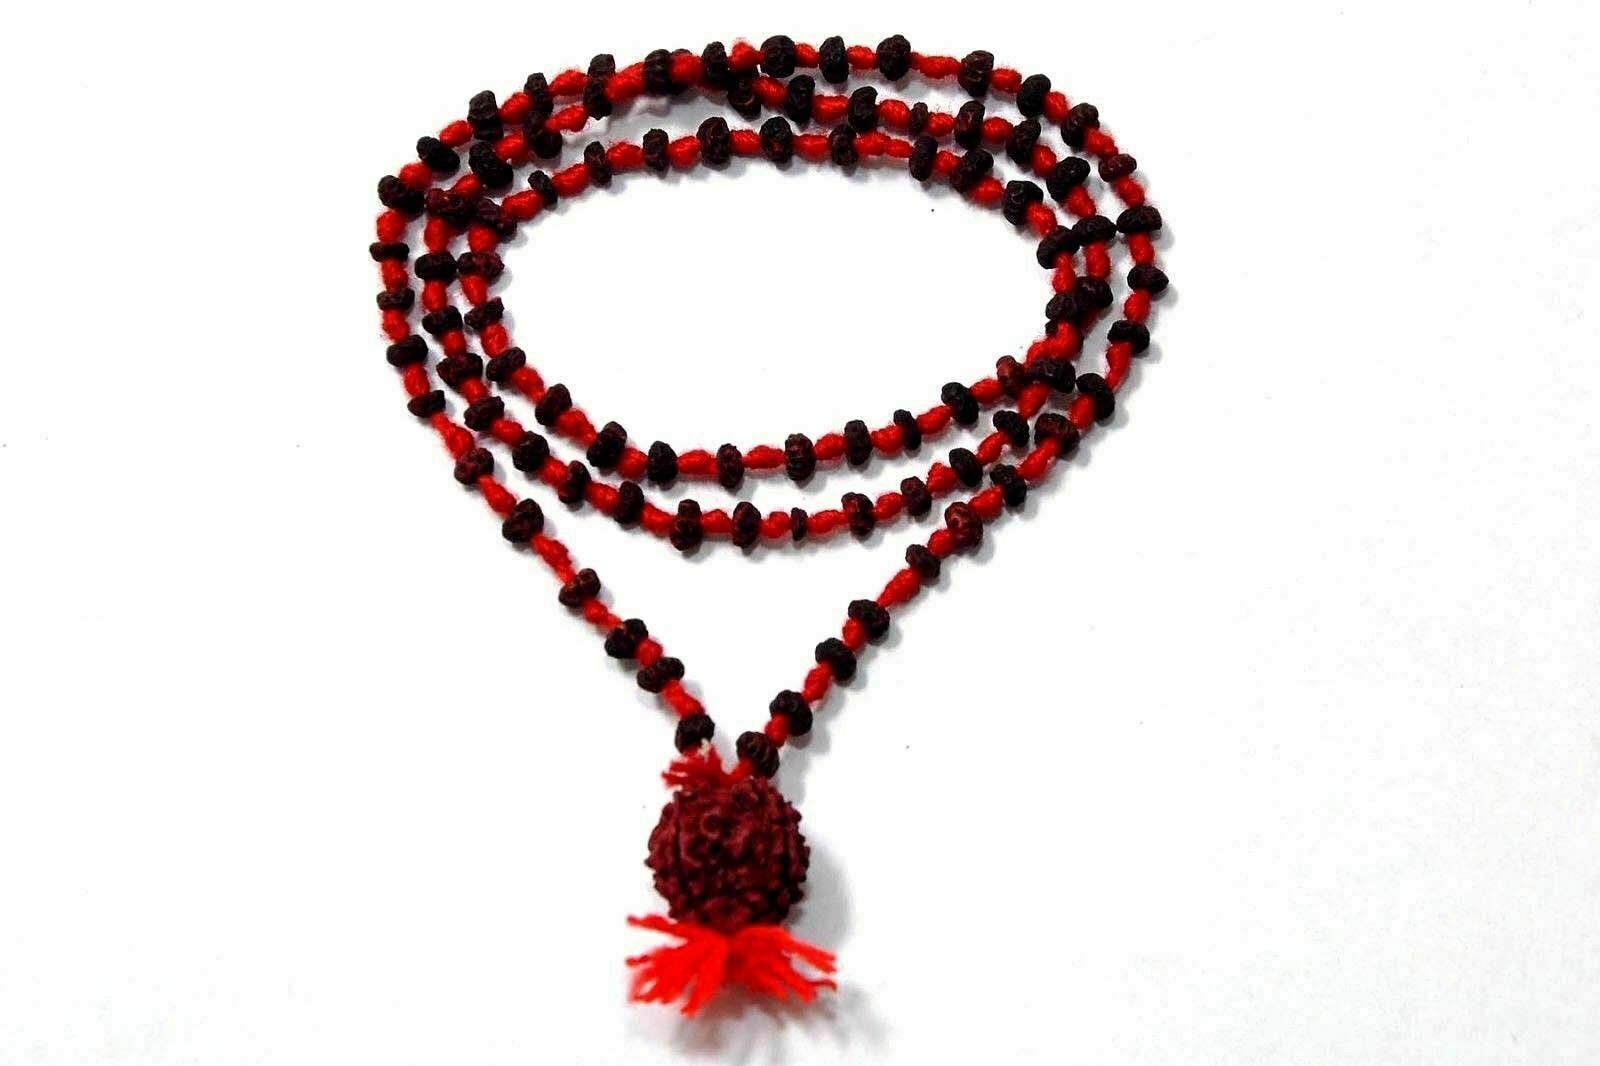 Real Aghori Made MAA Kali Ashta Siddhi Necklace - Obtain 8 Occult Psychic Powers